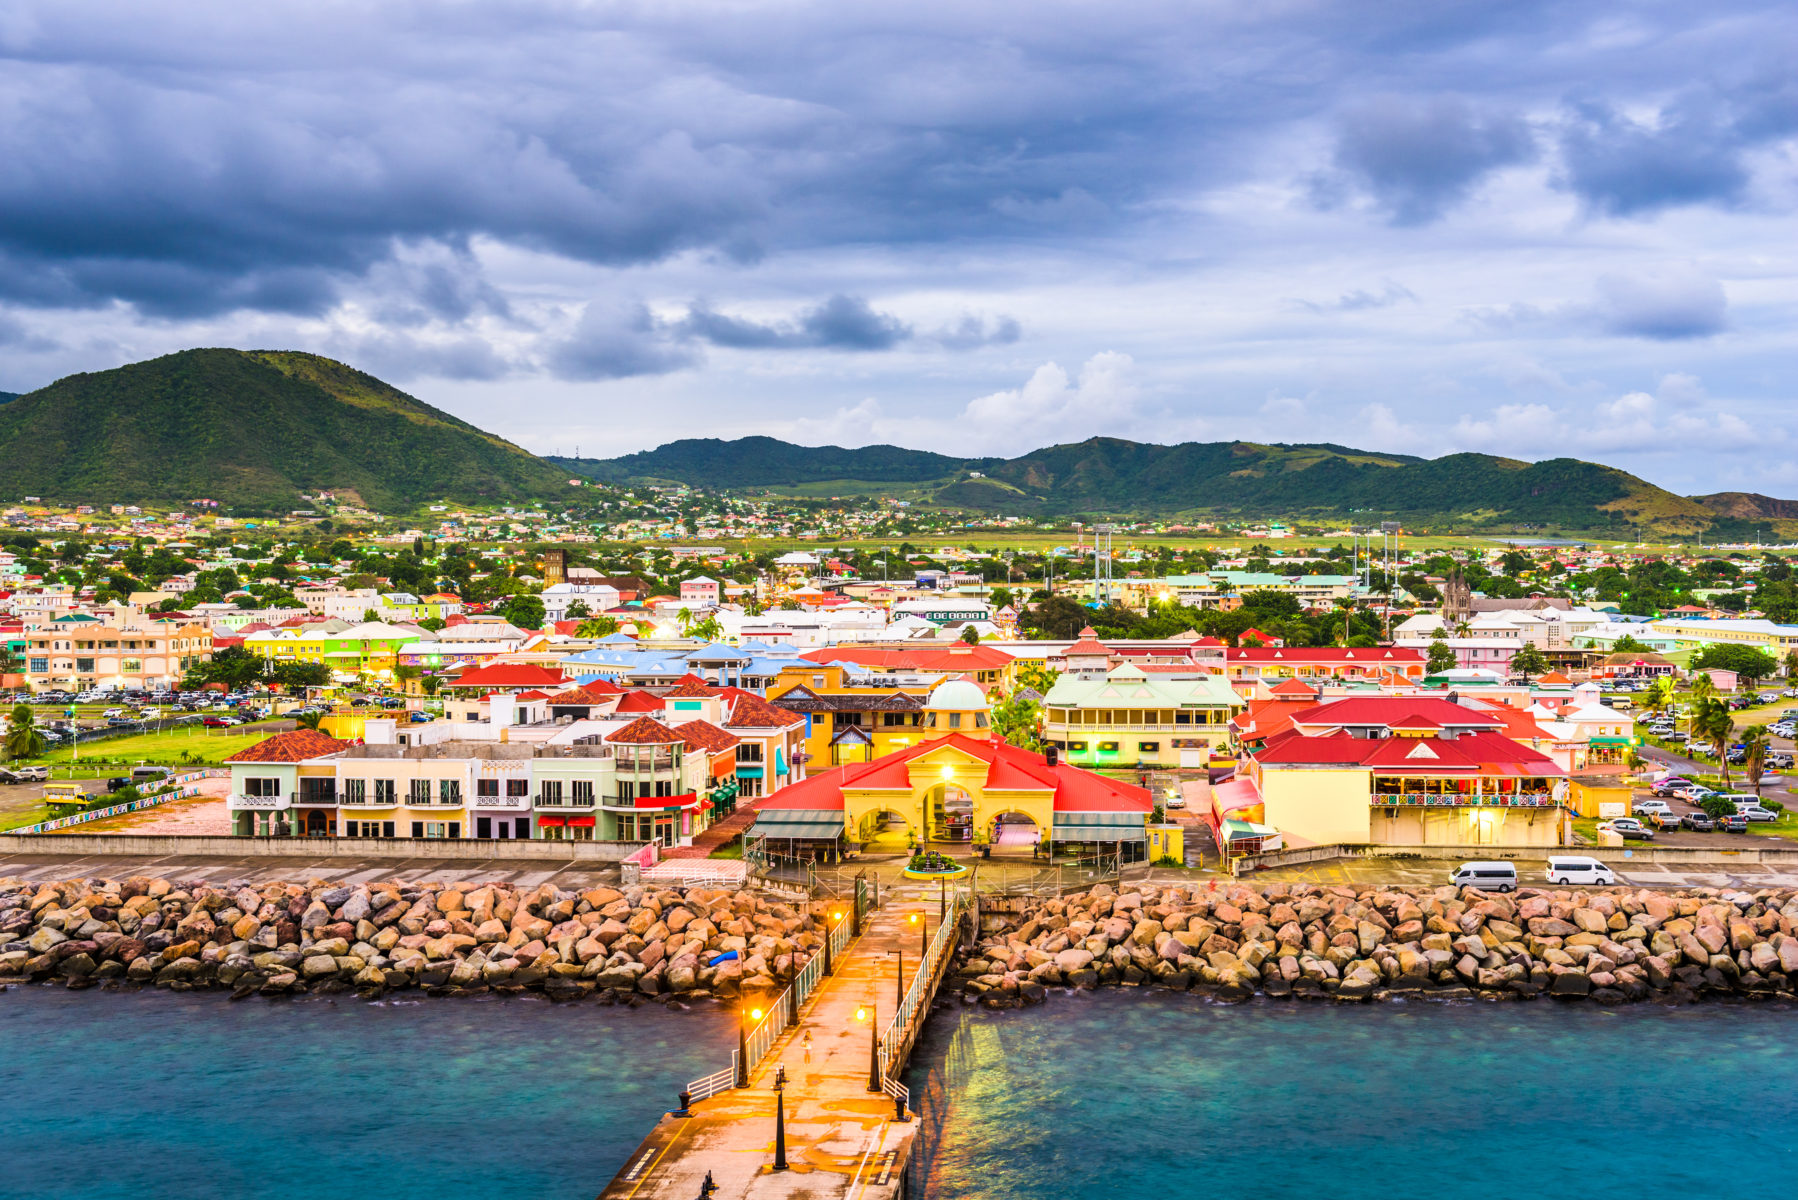 st.-kitts-and-nevis-citizenship-by-investment-offers-visa-free-access-to-156-countries